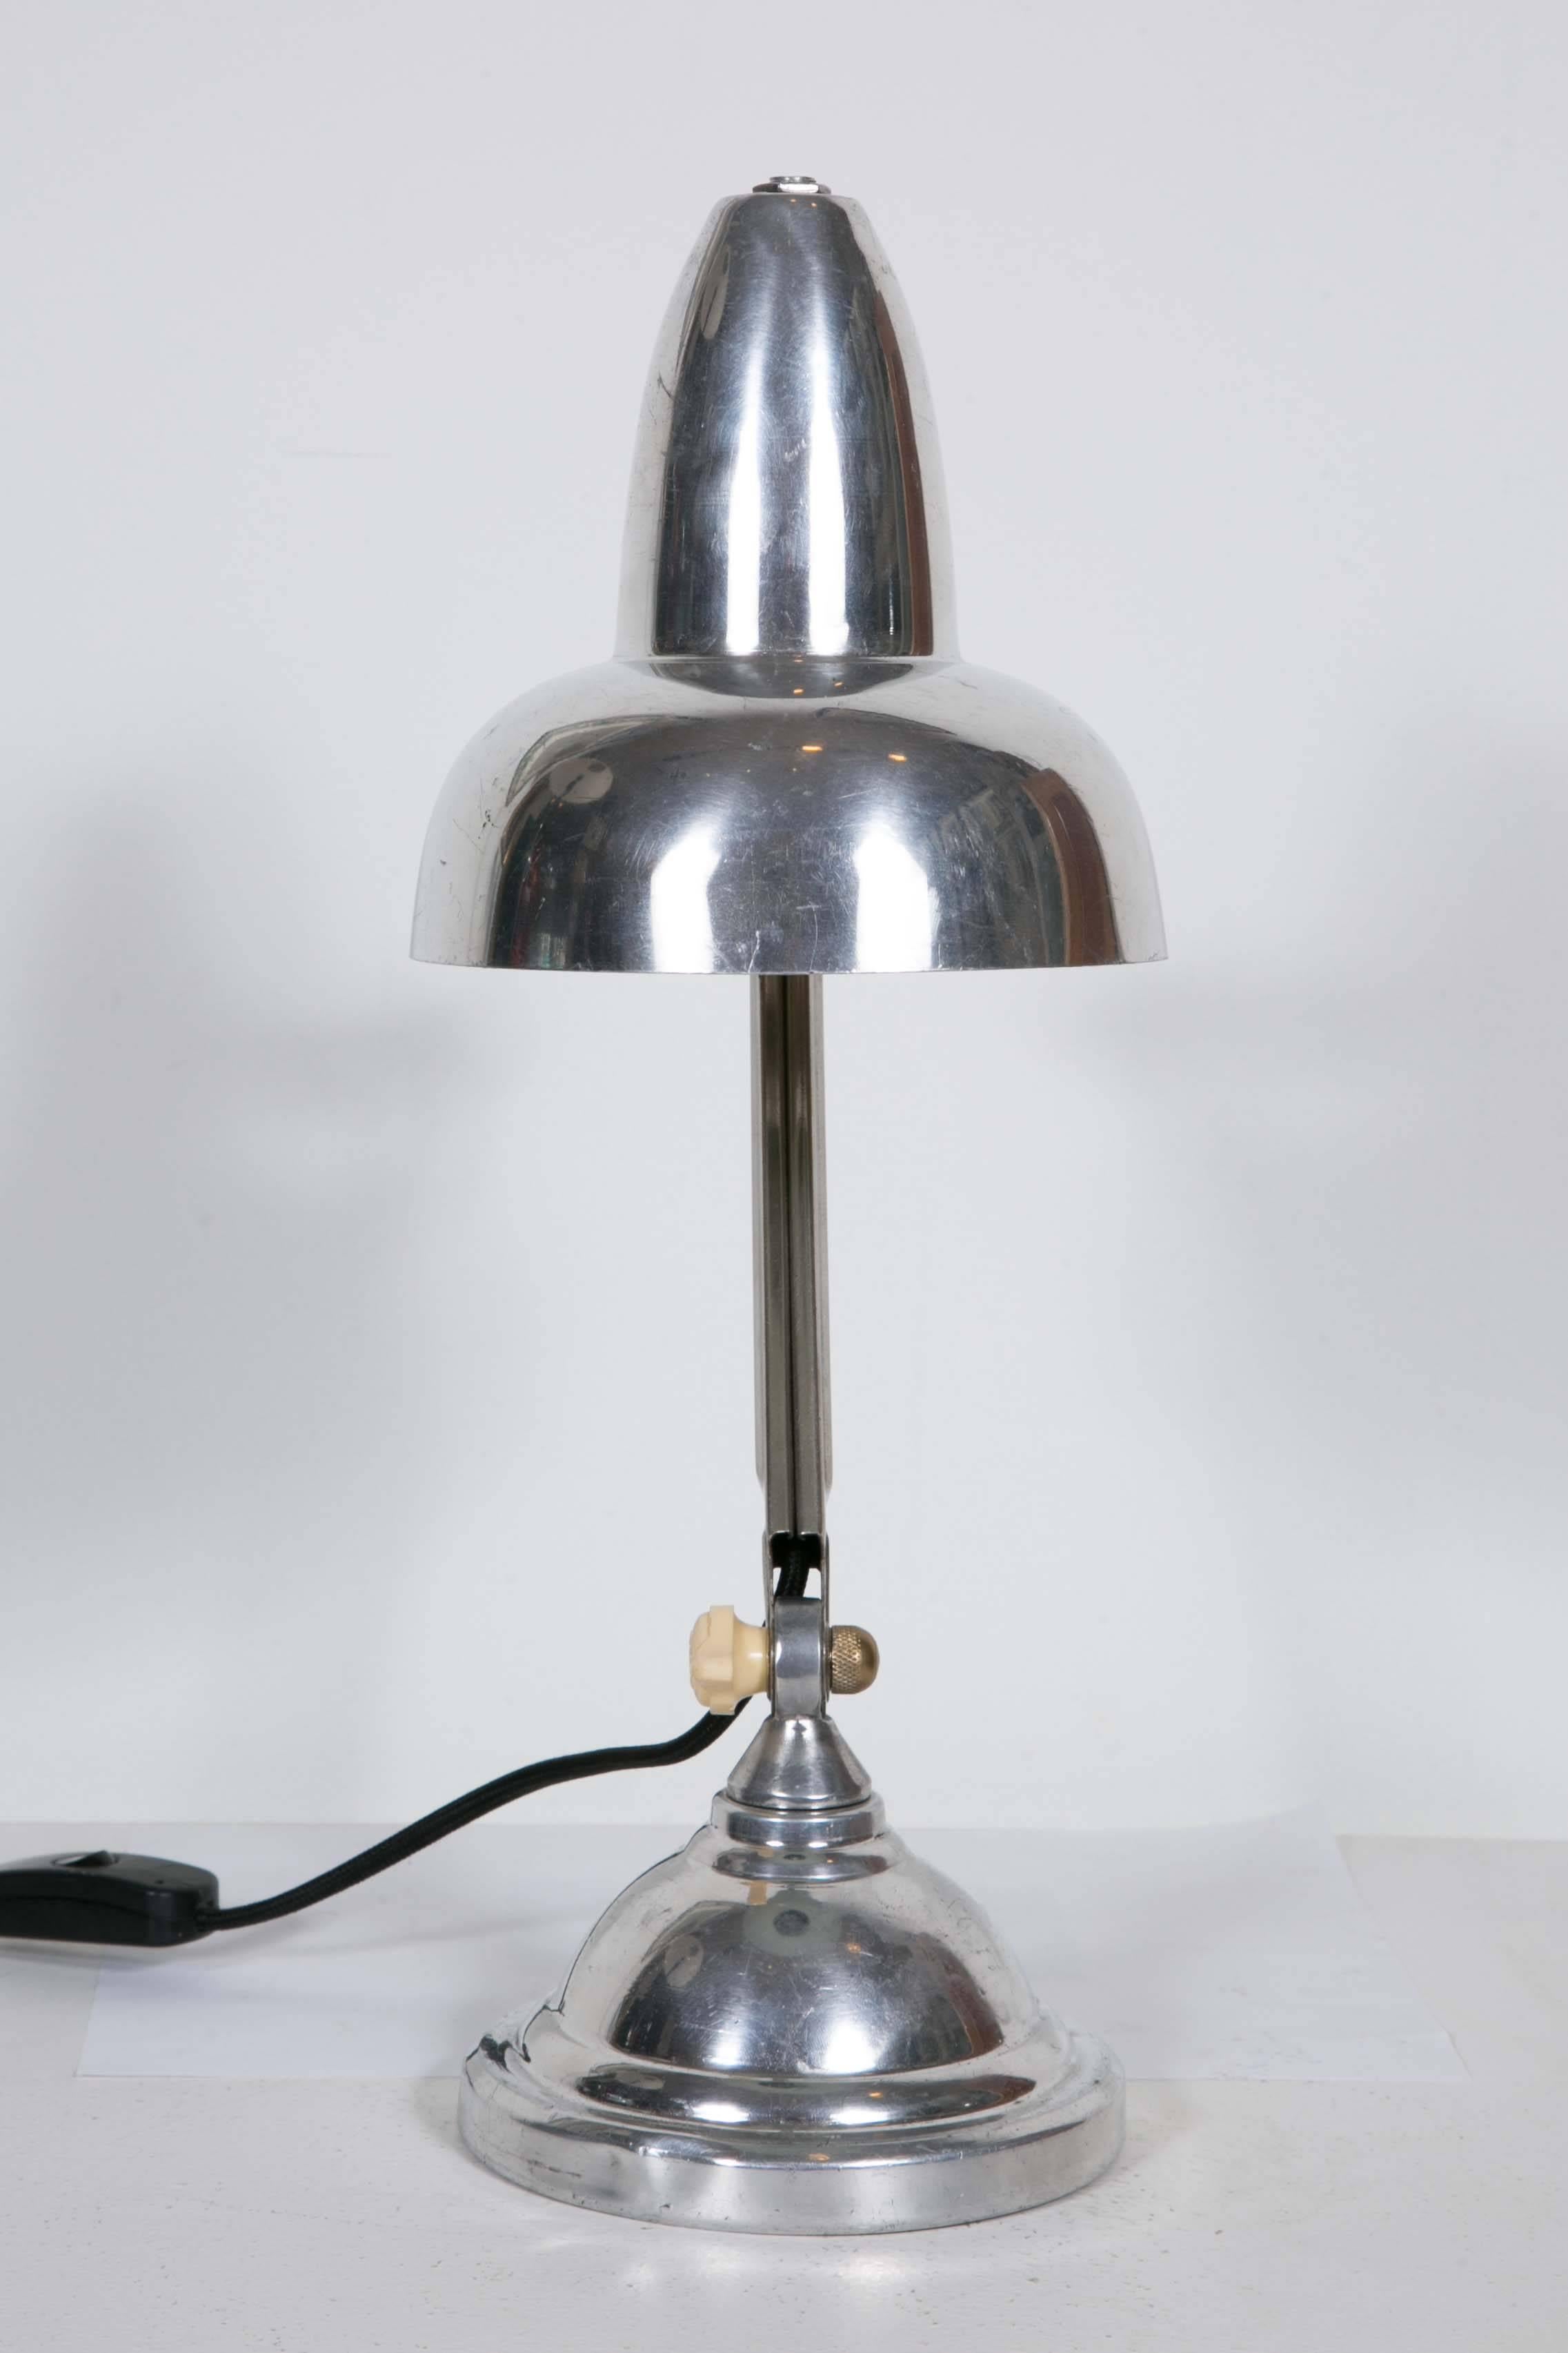 French Art Deco desk lamp produced by SuperChrome, a French workshop specialized in lamps for jewelers workshops, 1930s. Made in aluminium with bakelite knobs.
Wired for European use.